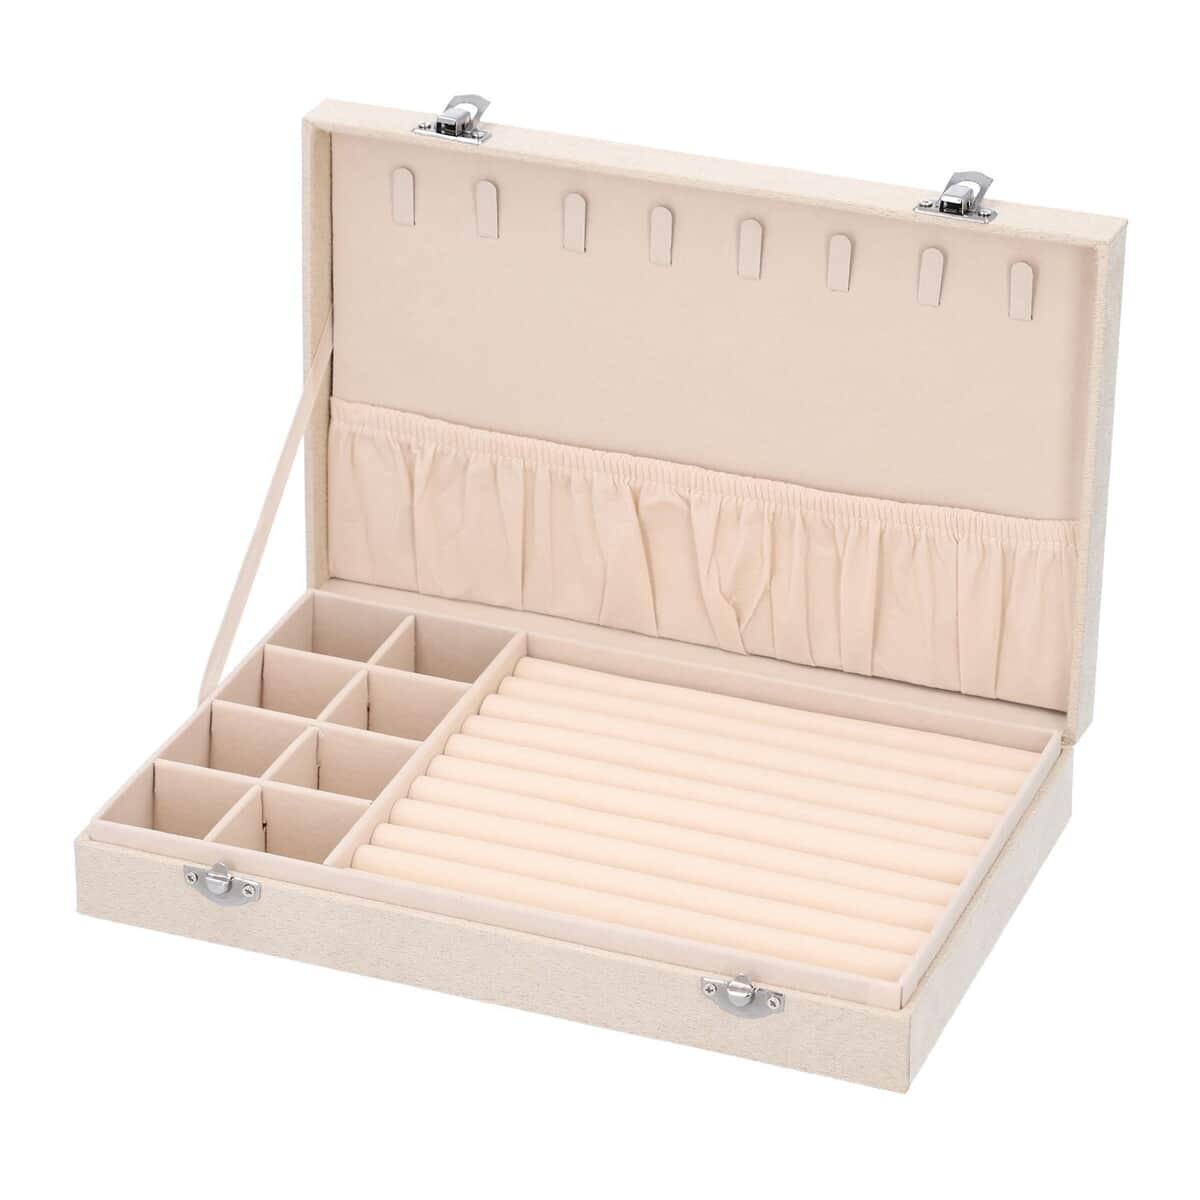 Buy Ivory Velvet Jewelry Box with Anti Tarnish Lining & Lock, Anti Tarnish  Jewelry Case, Jewelry Organizer, Jewelry Storage Box (8 Necklace Hooks, 8  Earrings/Pendant Sections and 10 Rings Slots) at ShopLC.